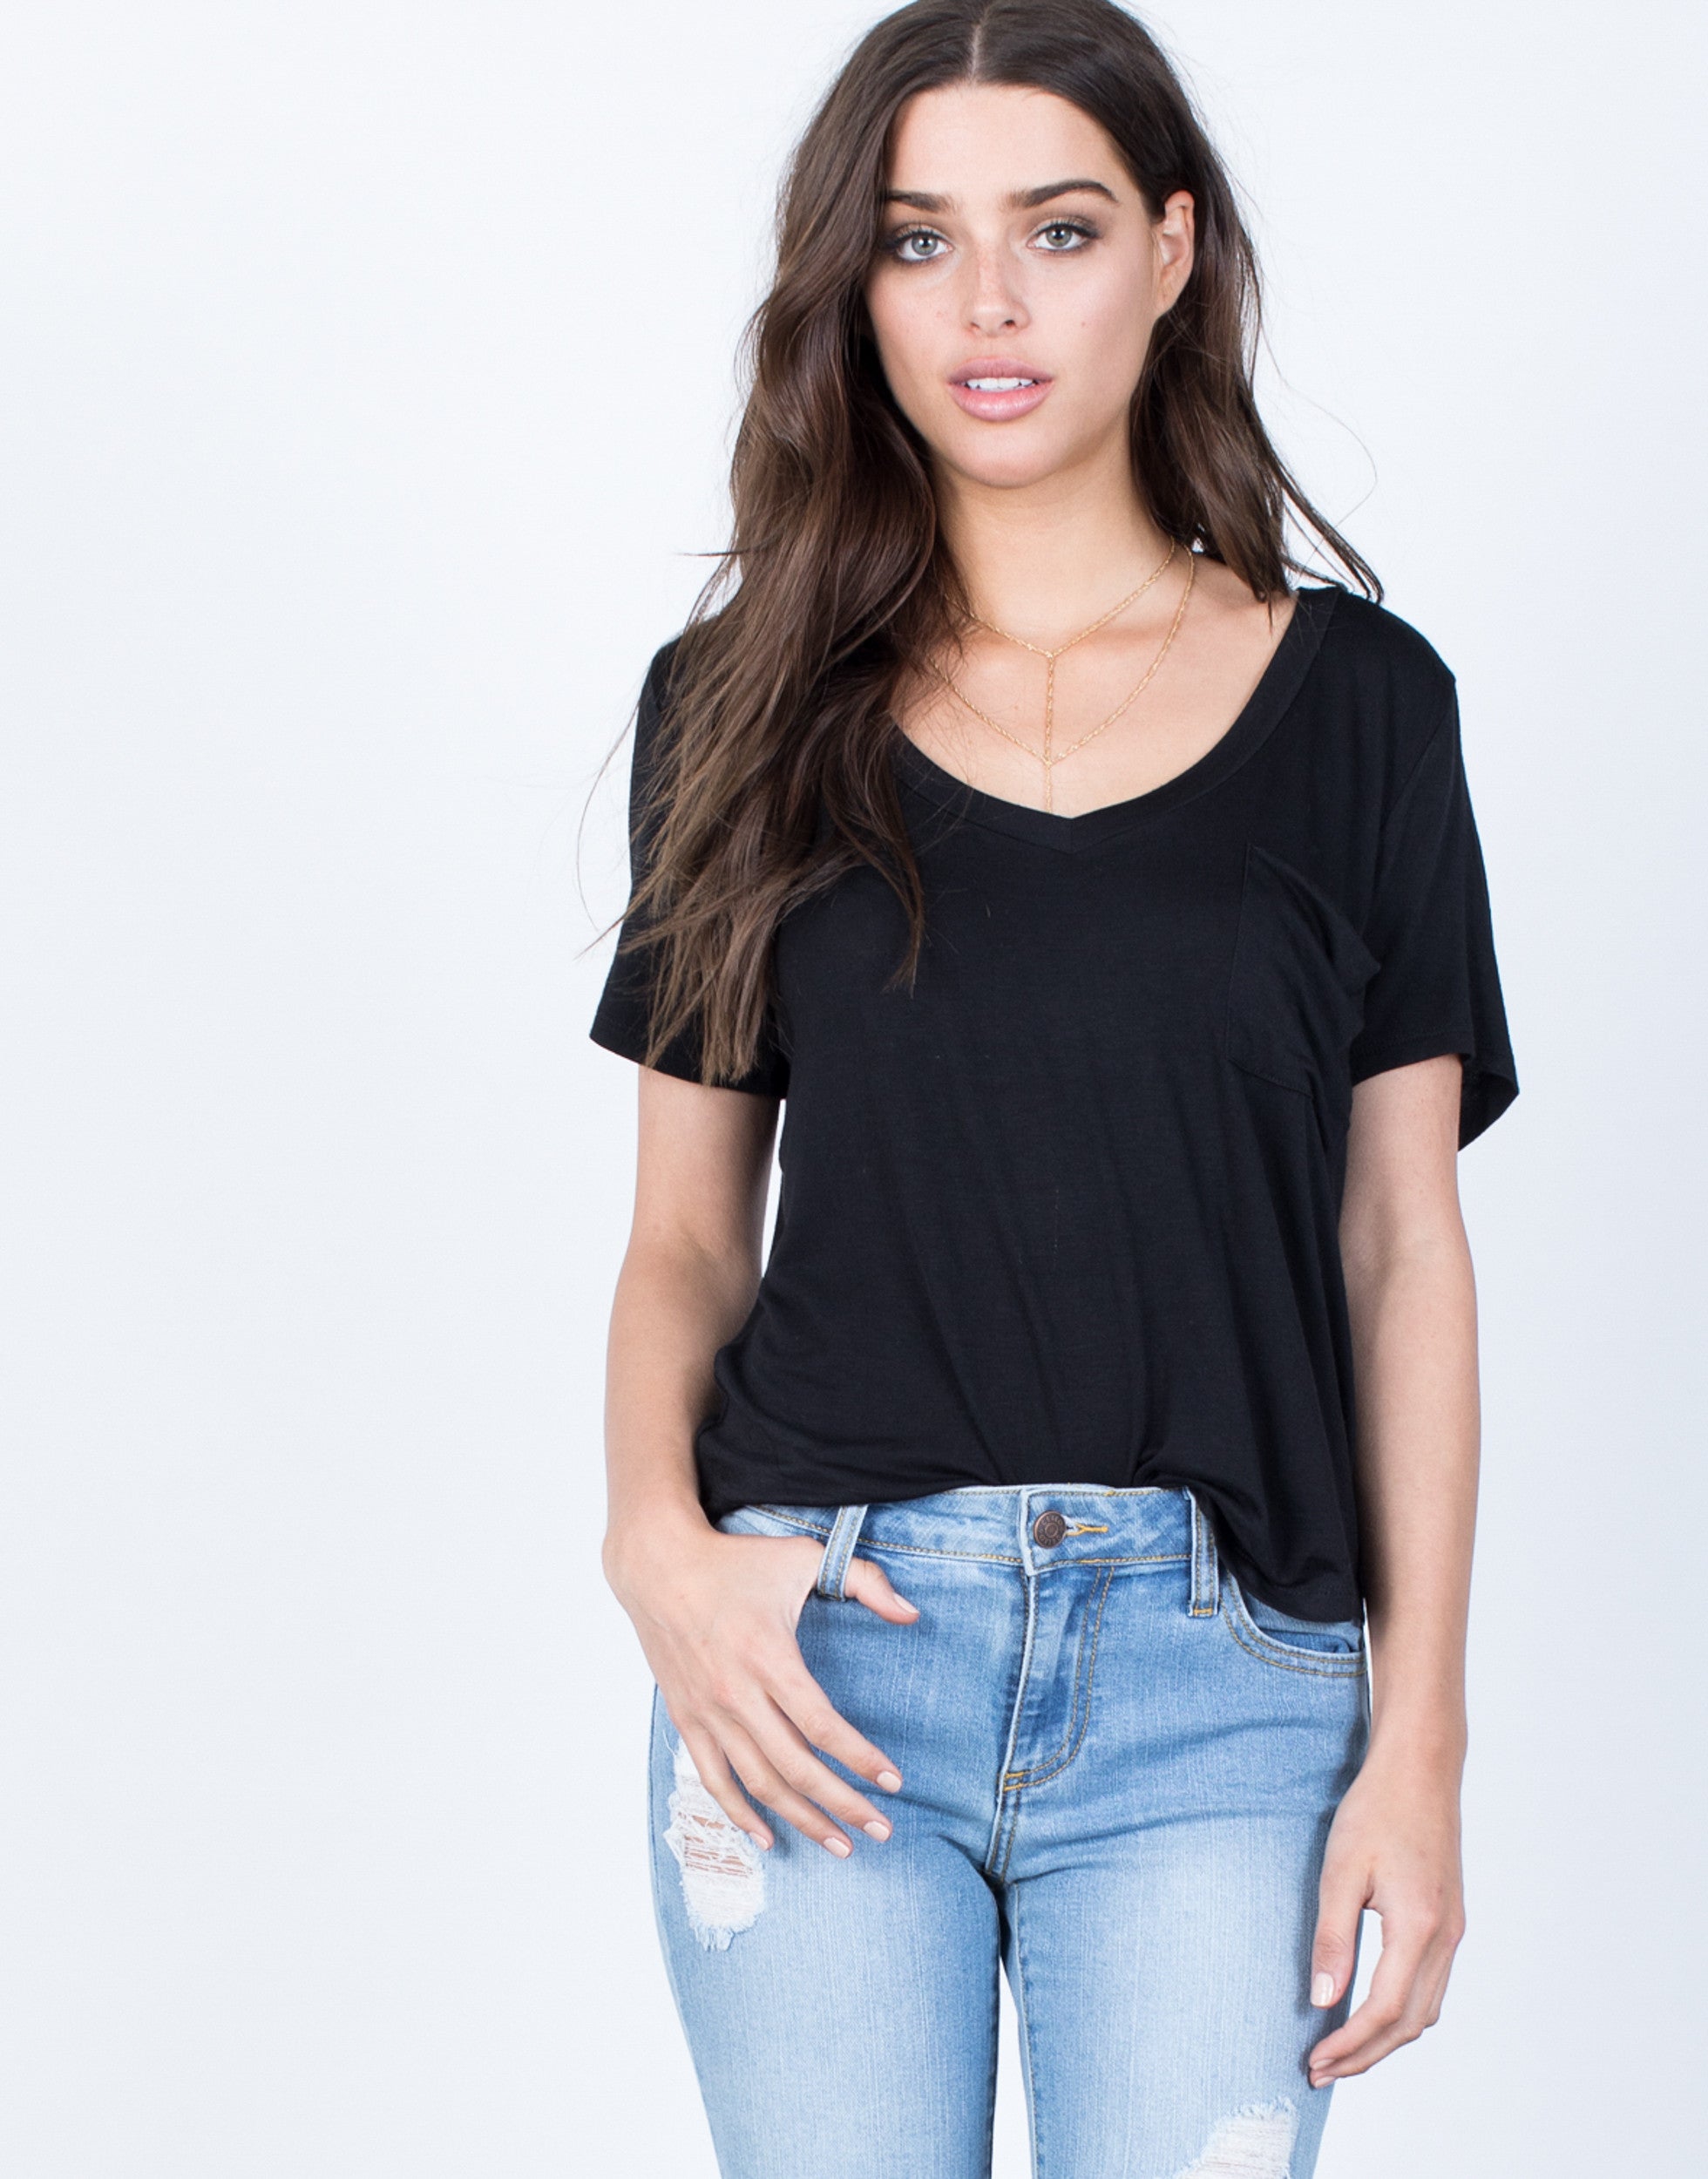 Super Relaxed Tee - V Neck Tee - Flowy 